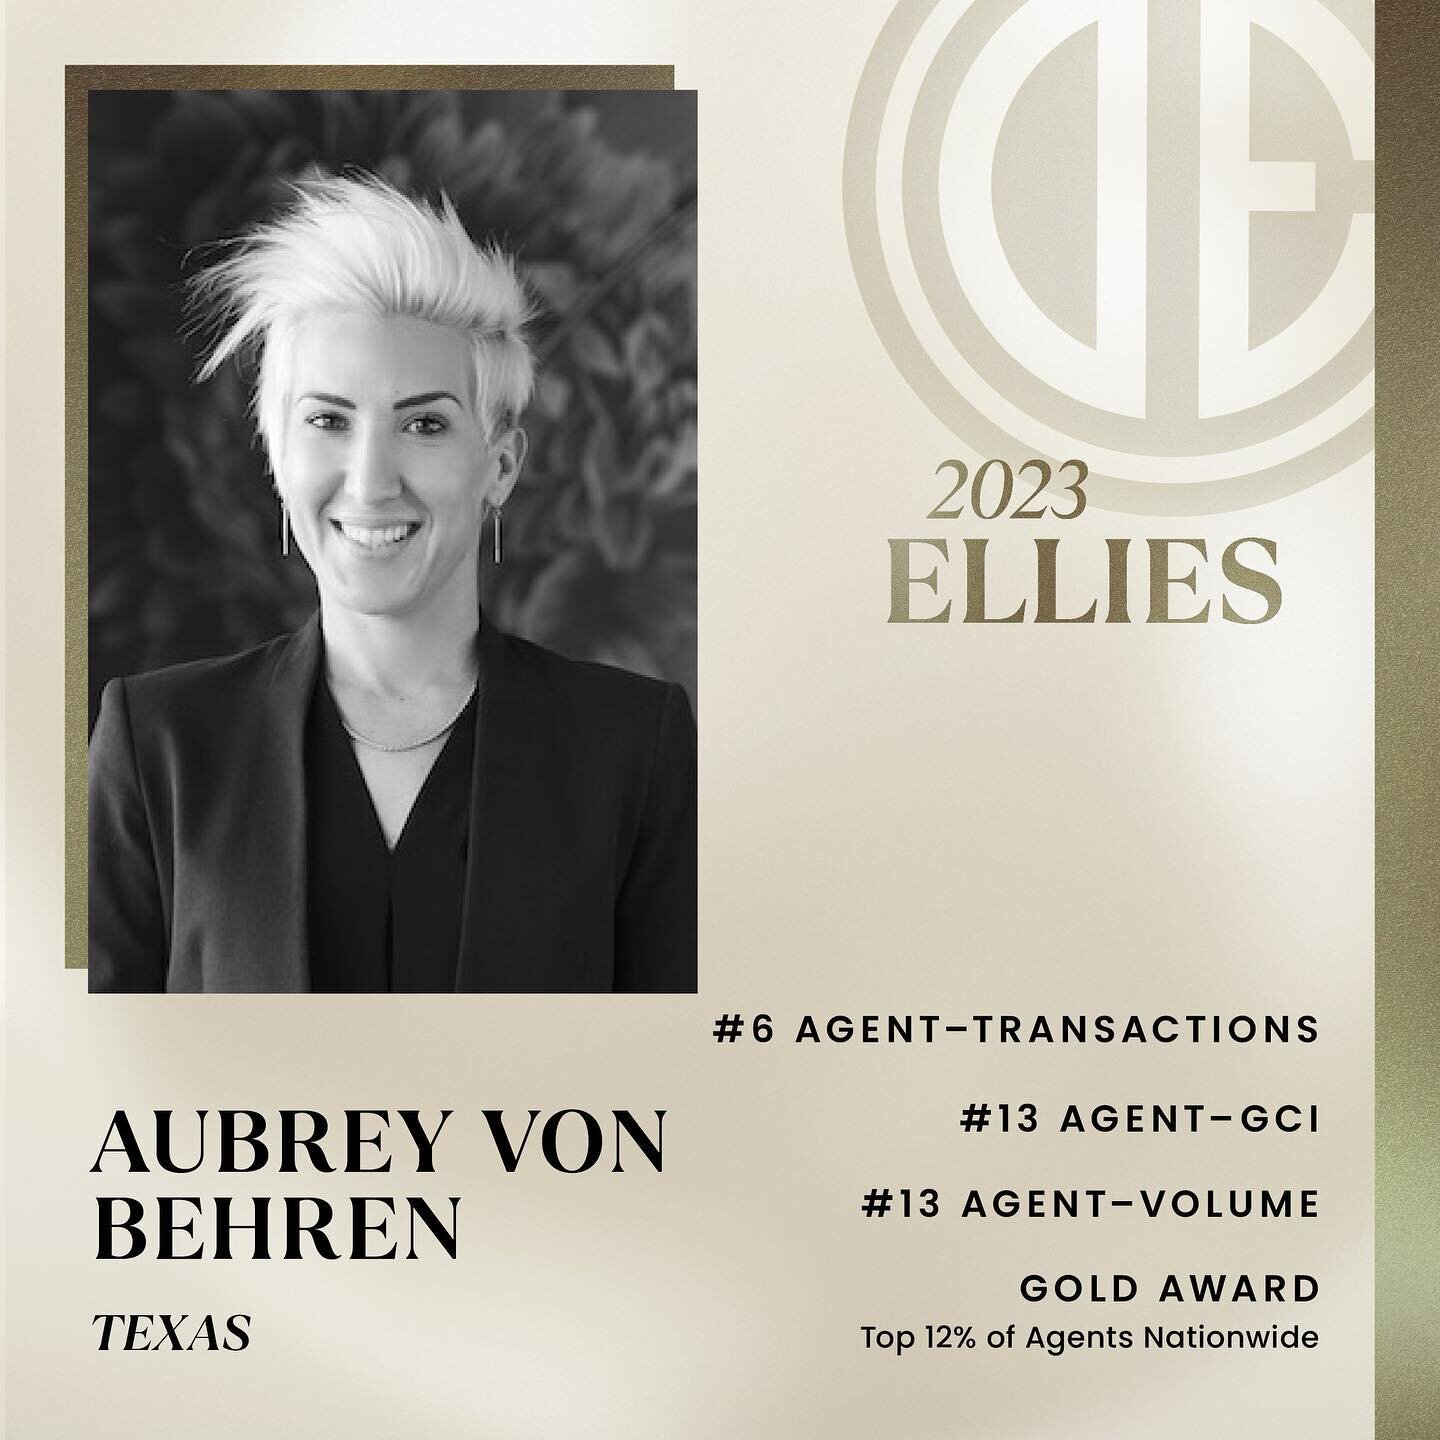 Super excited to be named in Douglas Elliman&rsquo;s annual Ellie Awards! 

At the end of the day, what keeps me working hard is the joy I get to see on my clients&rsquo; faces along the way. Accepted offers, clean inspection reports, CLOSING DAY &he